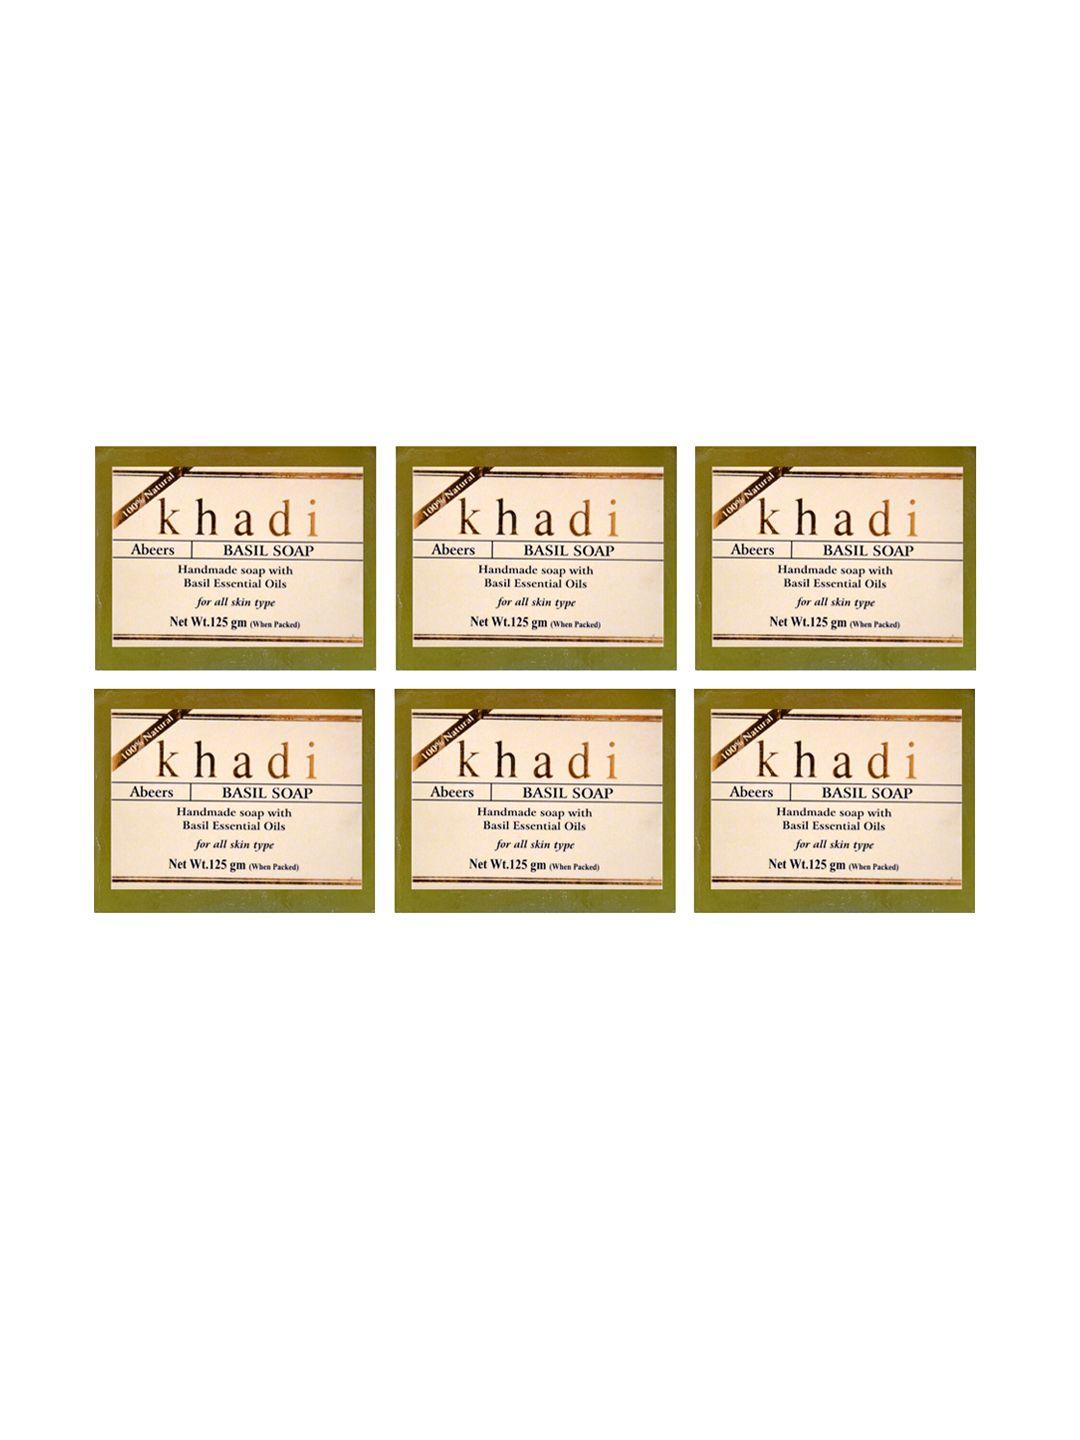 abeers khadi set of 6 basil soaps for all skin types - 125 g each